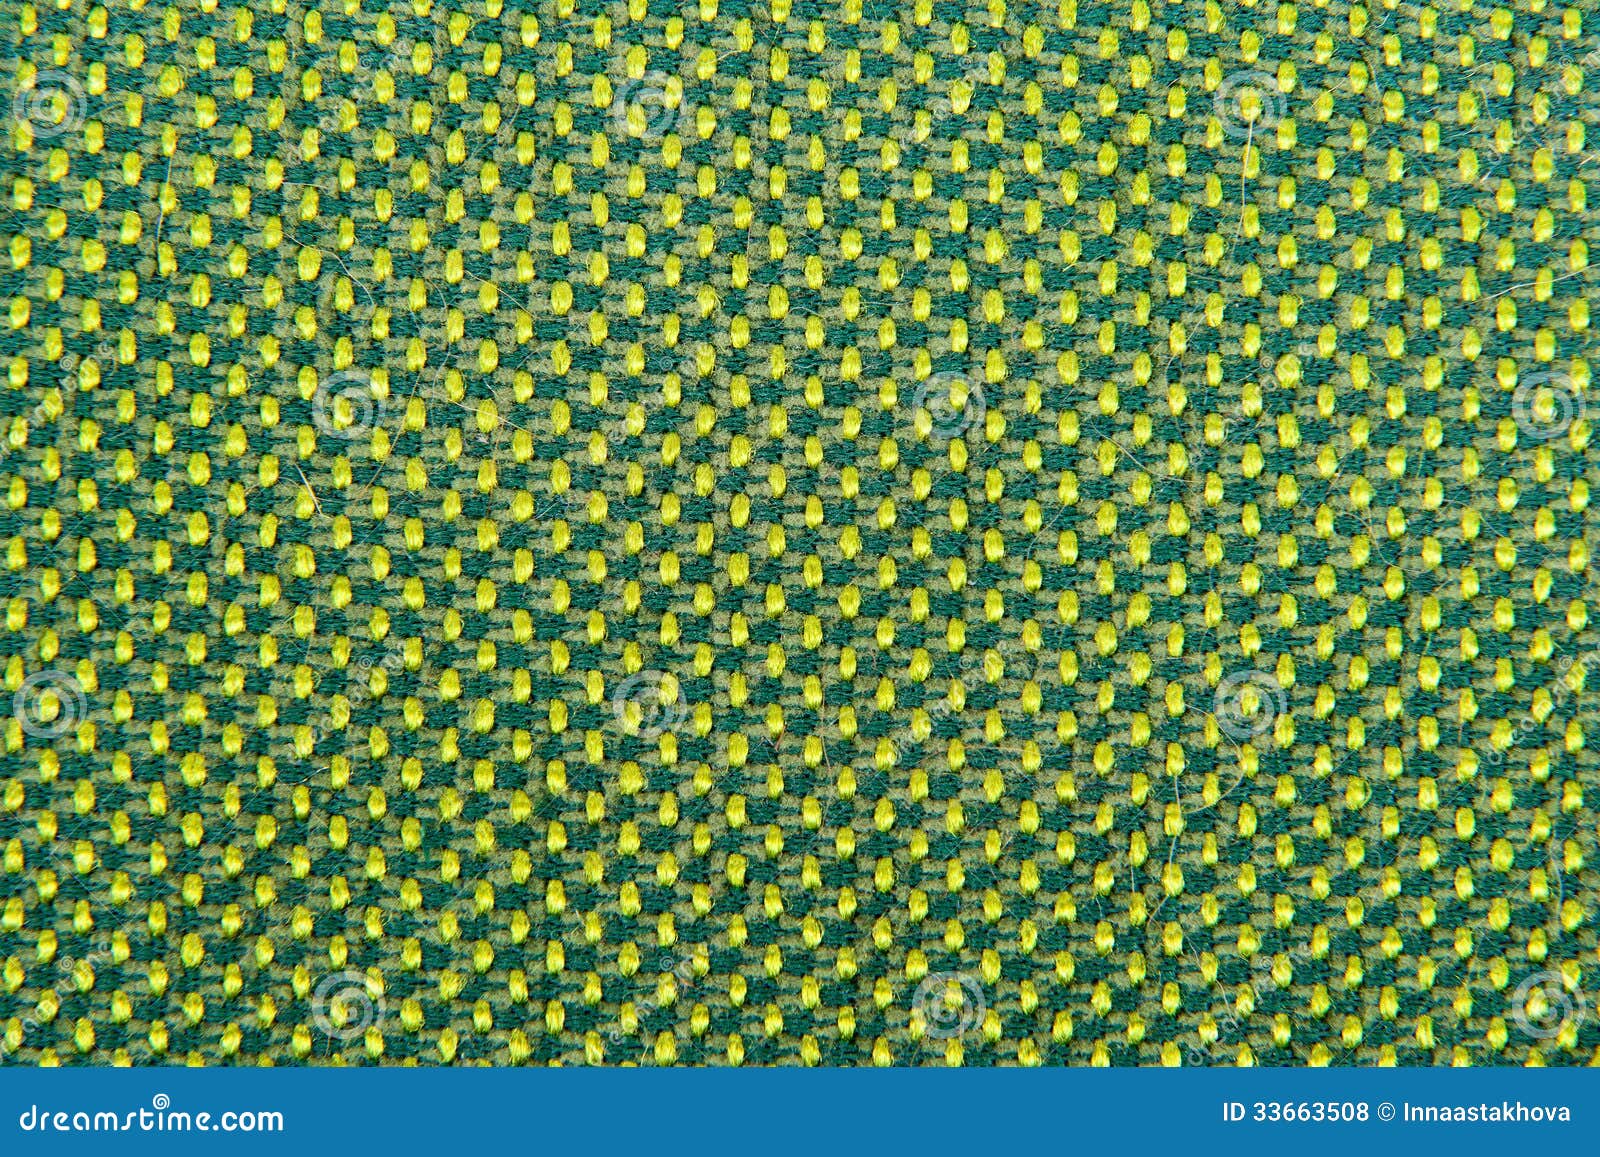 Green fabric texture stock photo. Image of background - 33663508